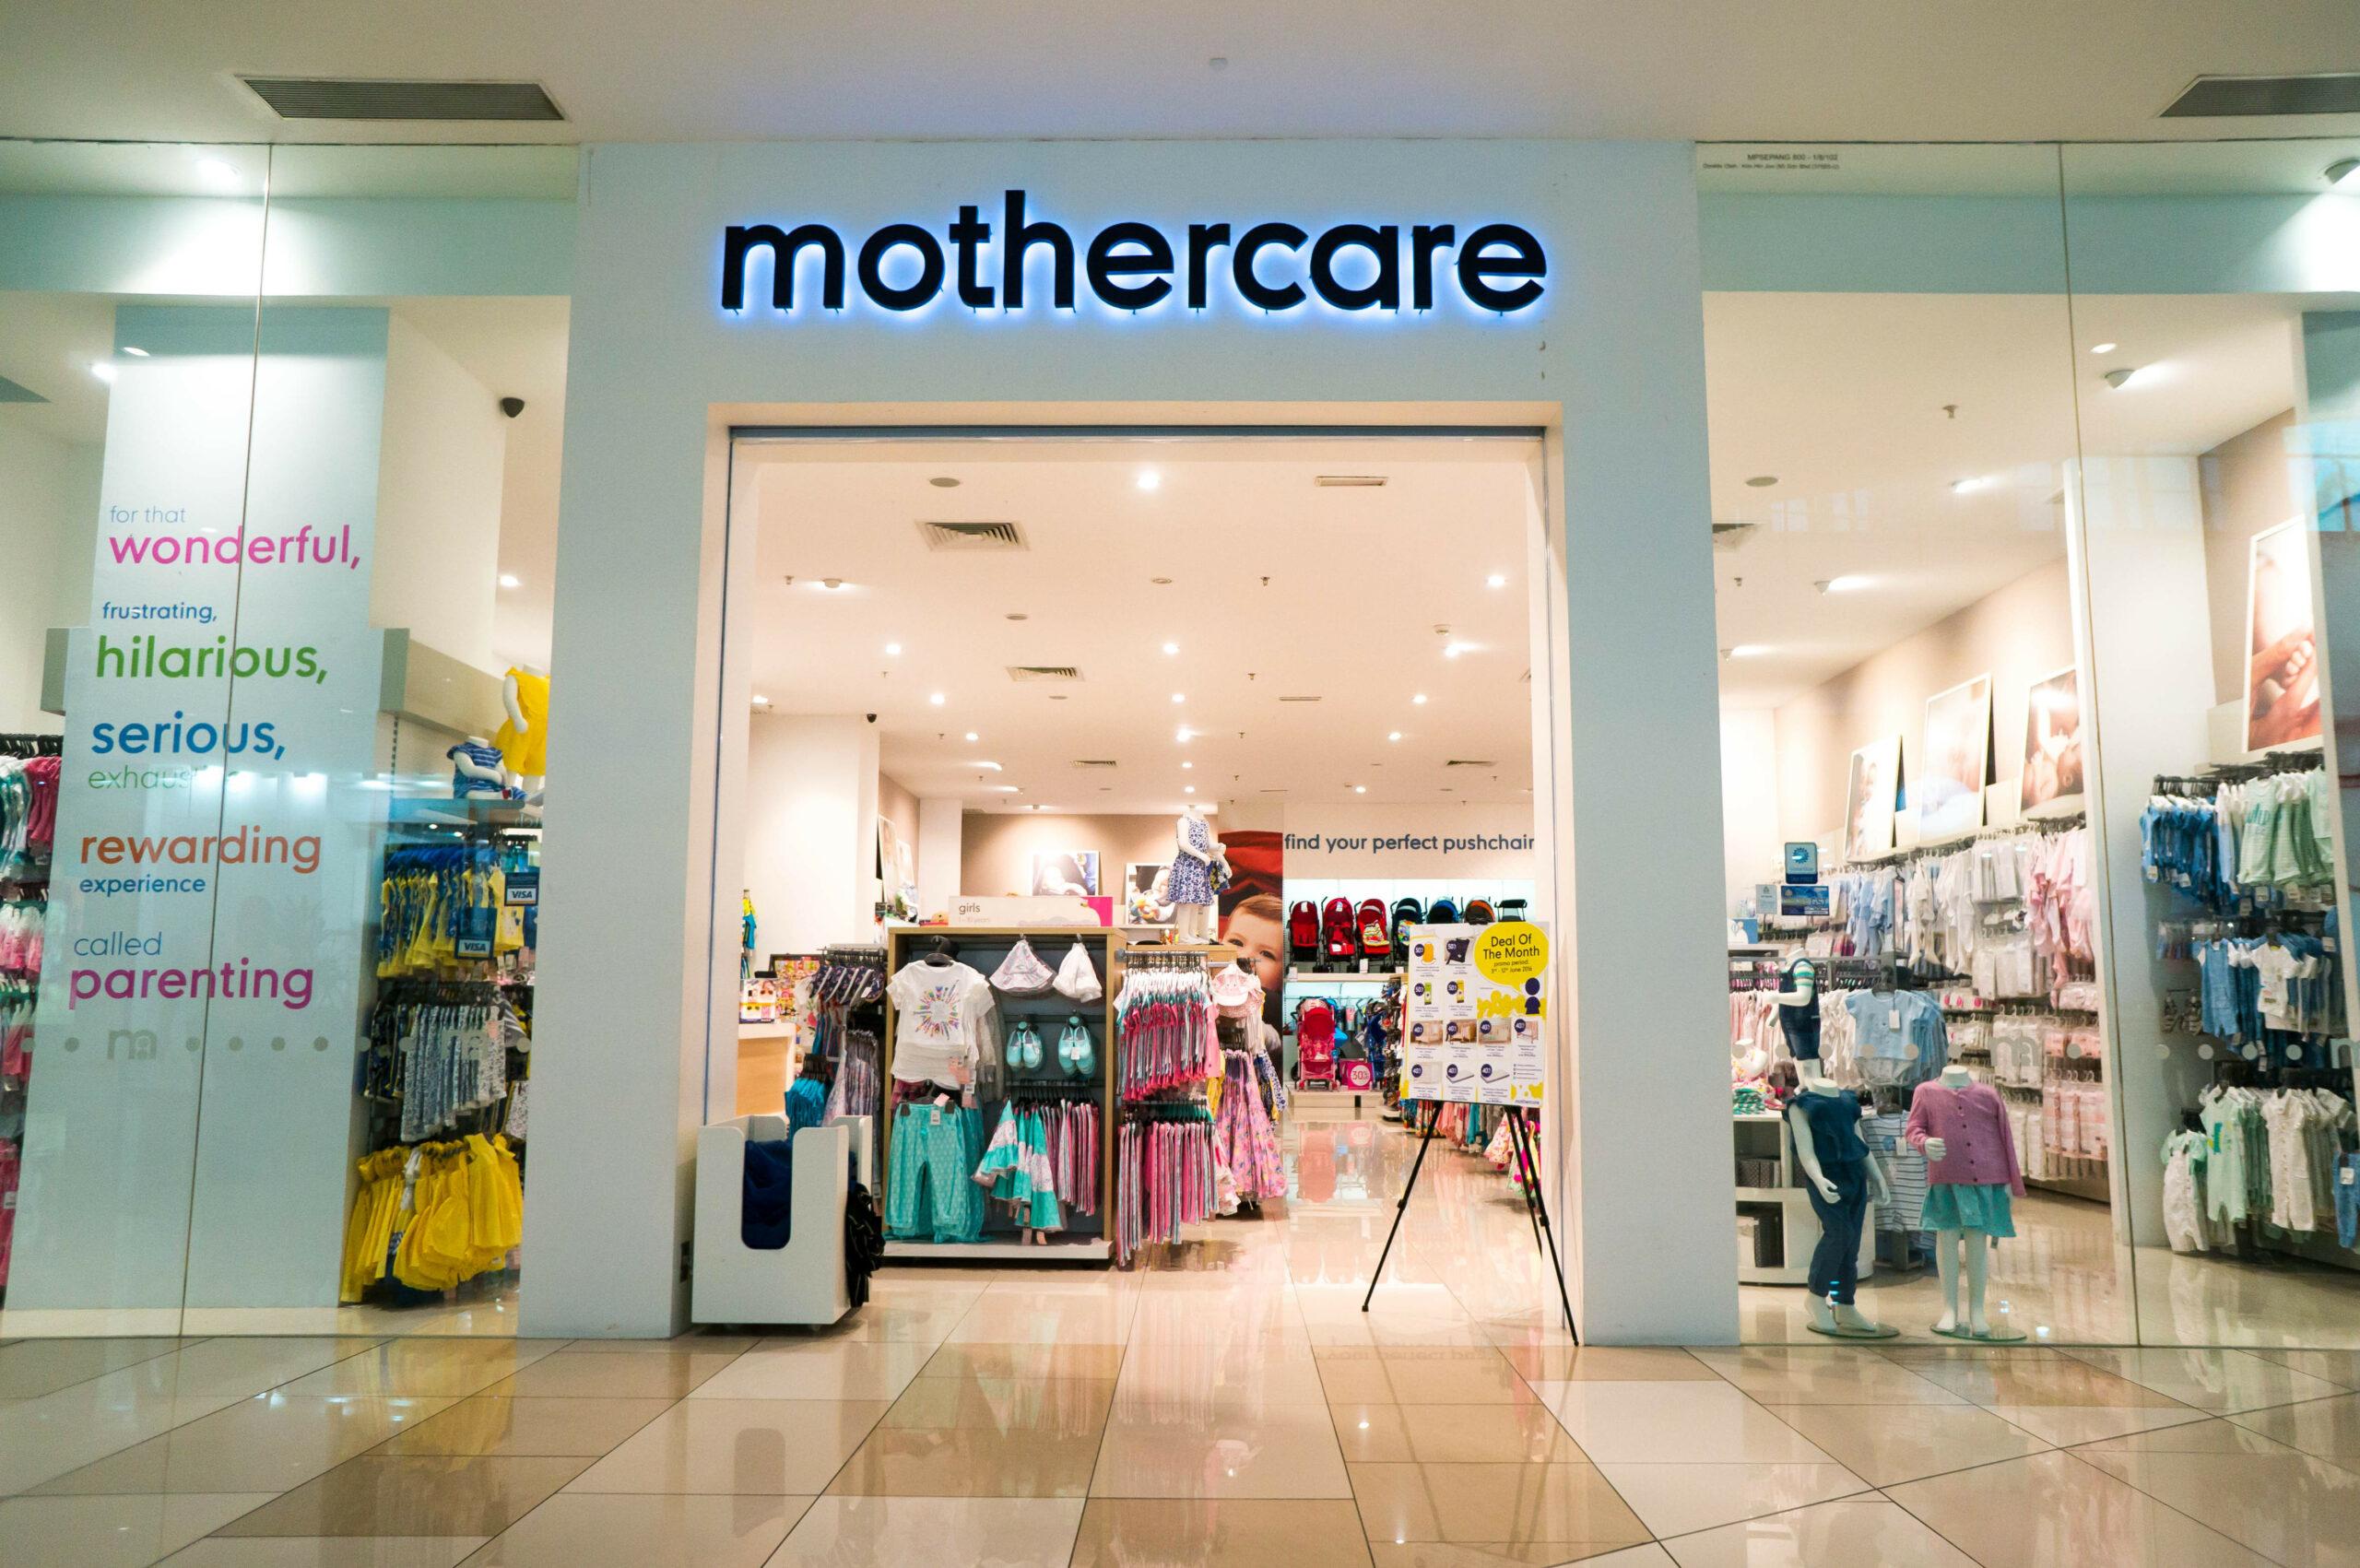  Mothercare  shares up as talks progress constructively 